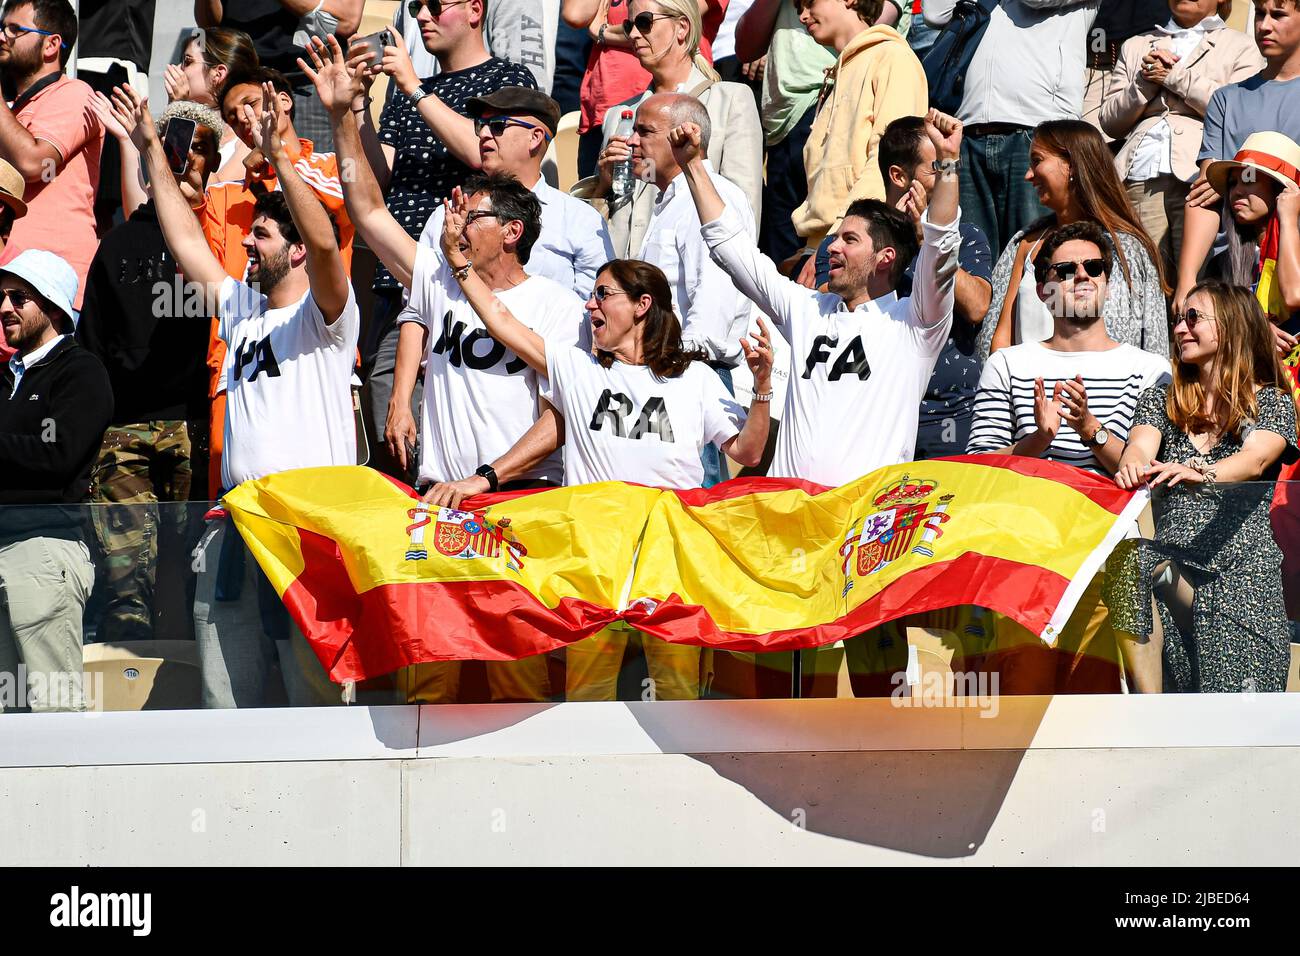 Paris, France - 05/06/2022, Spectators (fans, supporters) show their  support for Spain's Rafael Nadal with Spanish flags and "Vamos Rafa"  written on their tee-shirt during the French Open final between Rafael Nadal